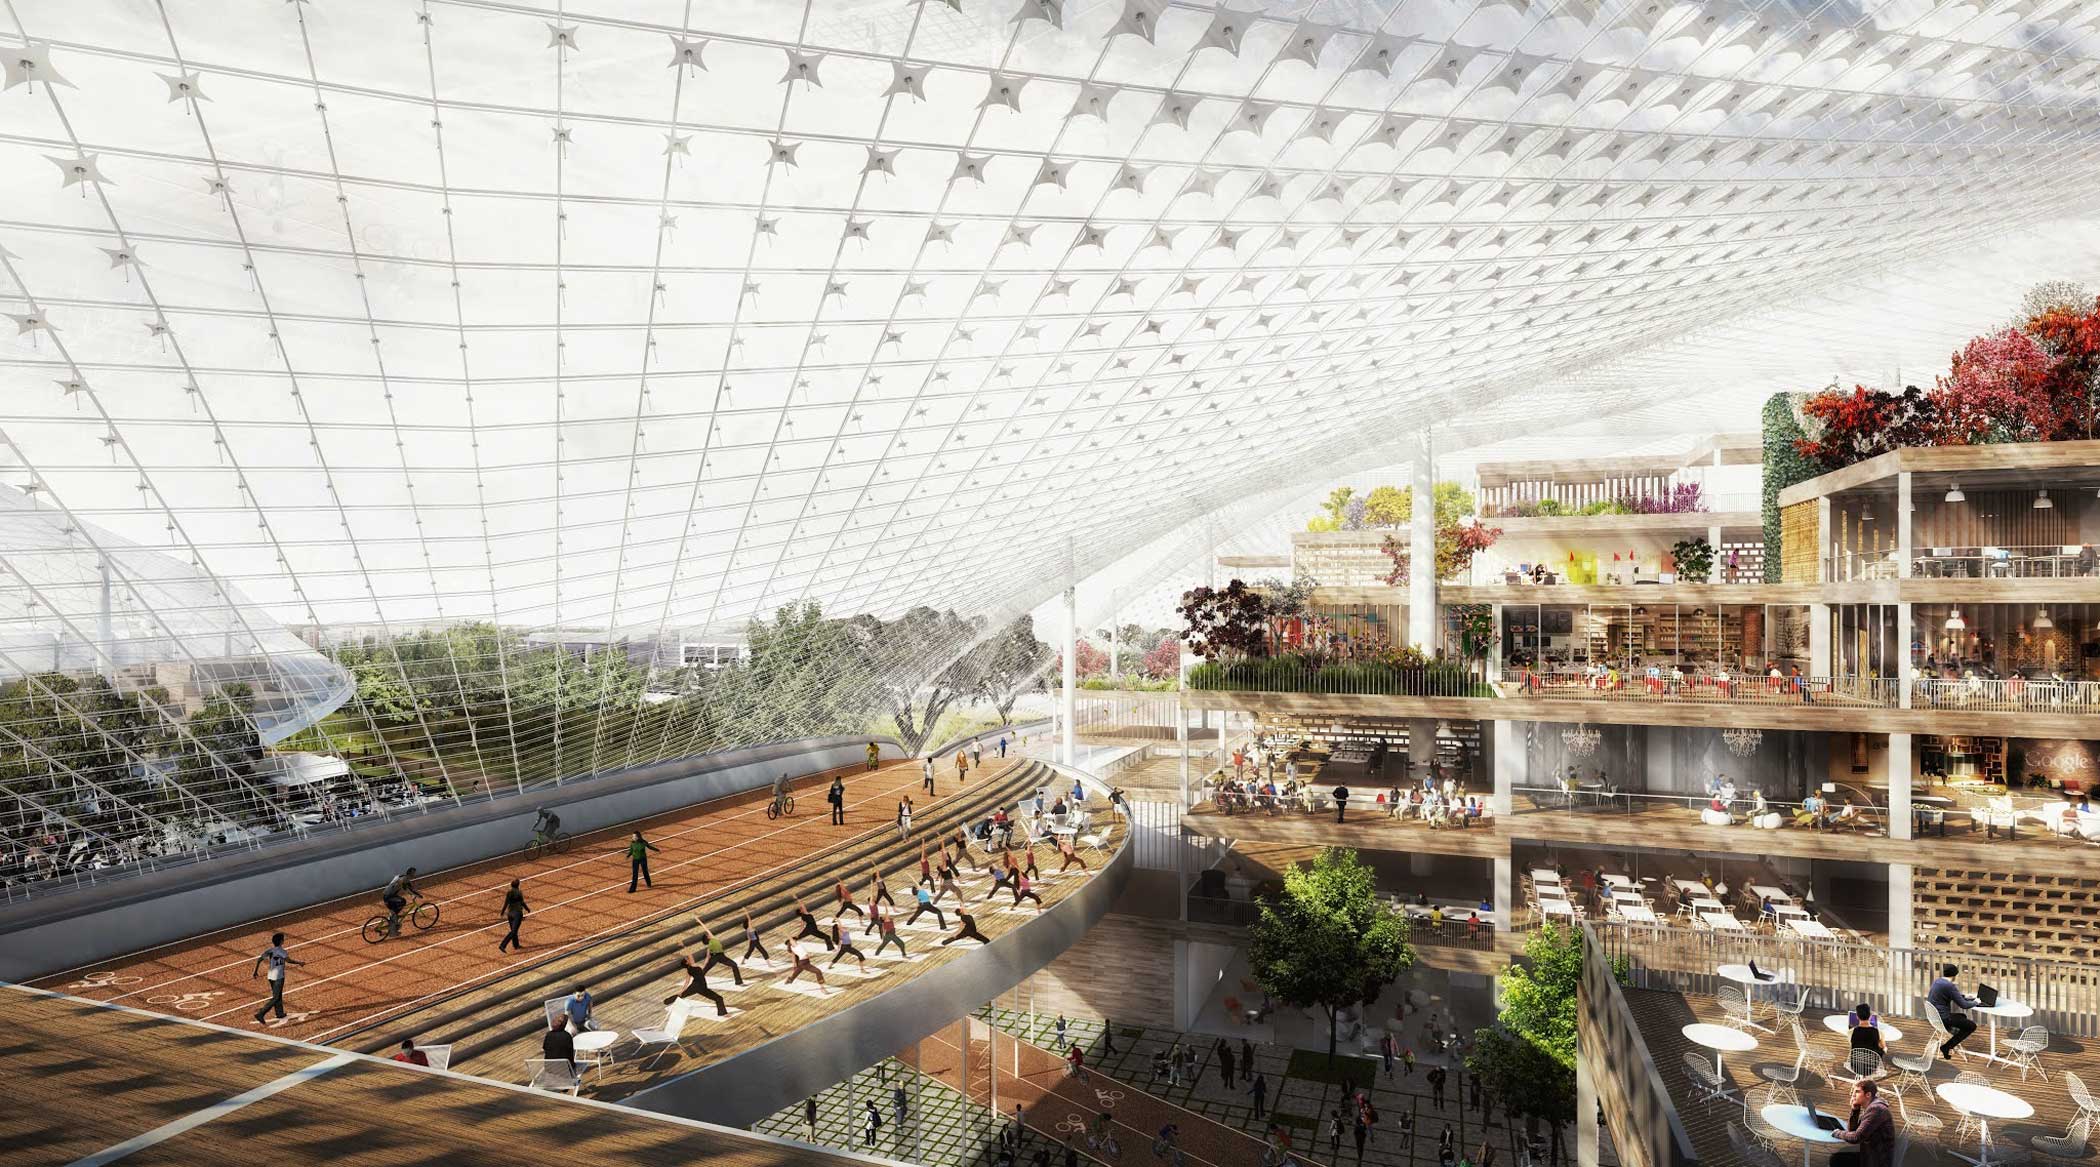 Google 2.5 million sq. ft. Mountain View, Calif., Google wants to add bike paths and retail space to better integrate with the surrounding community.